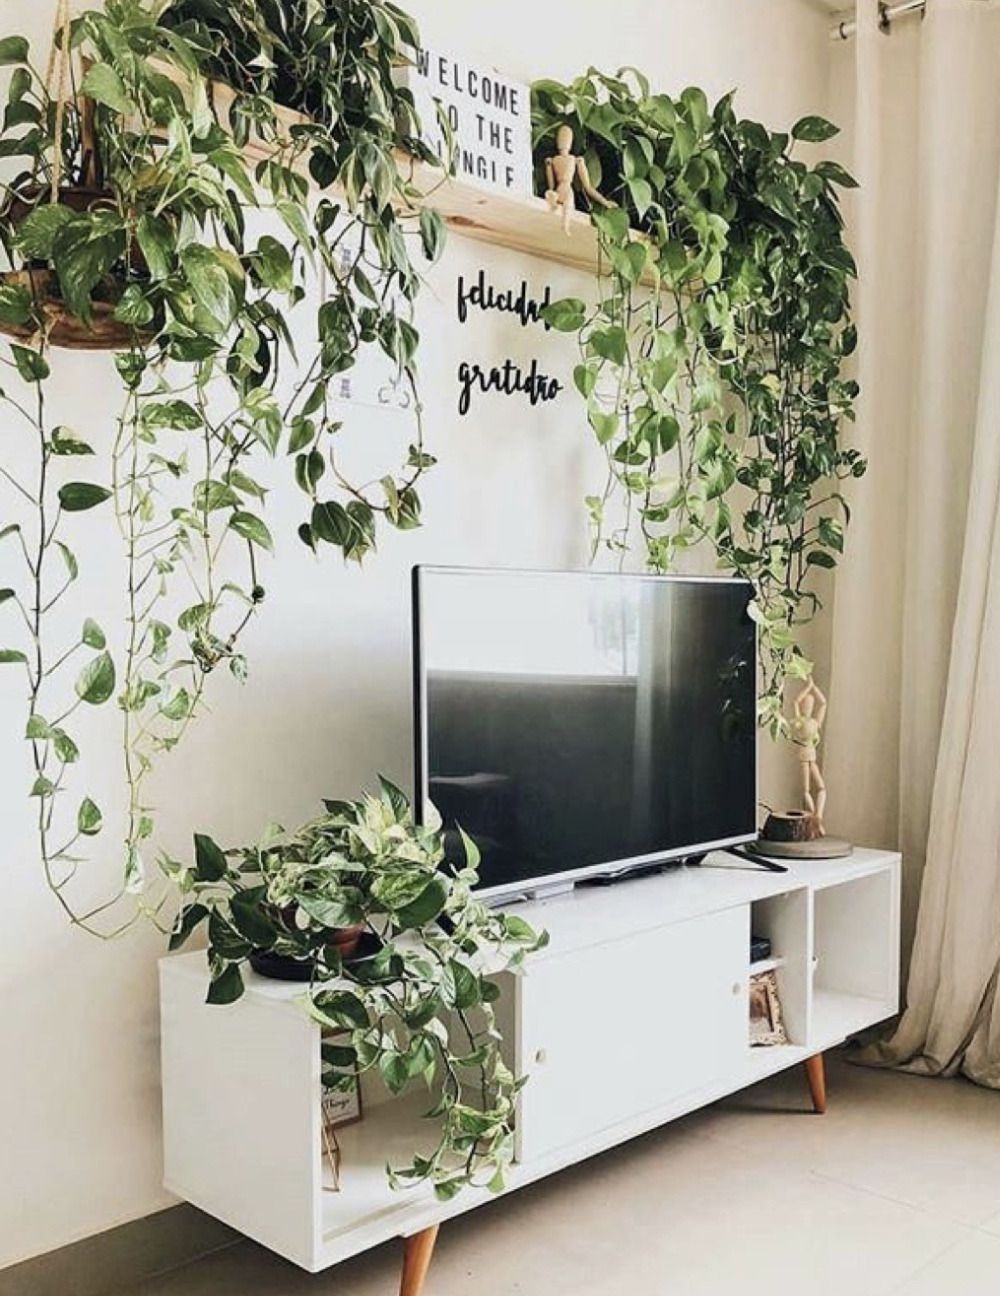 Growing Pothos to Decorate a Wall Shelf